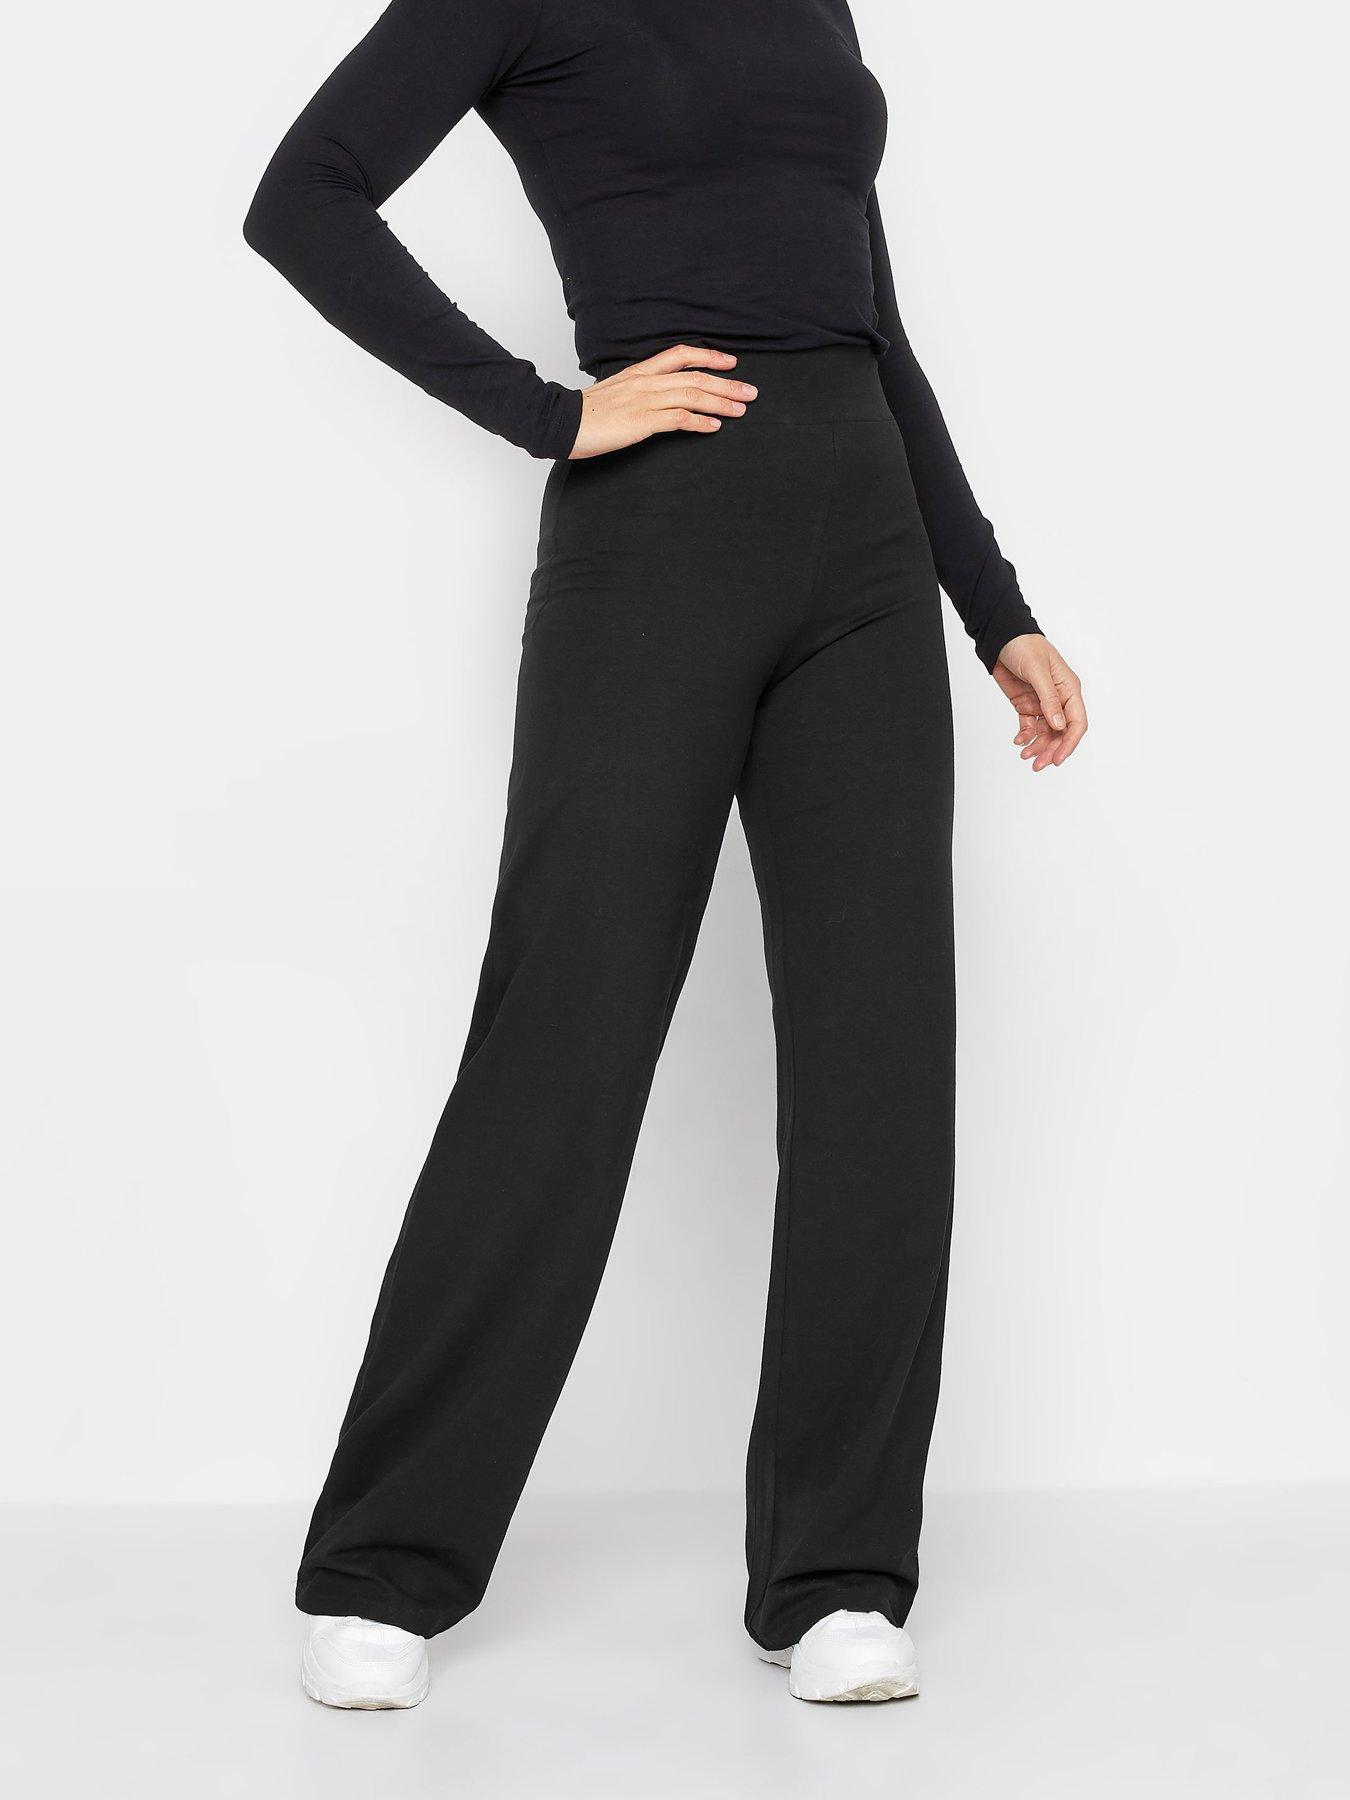 Nike Road To Wellness ribbed jersey wide leg pants in black